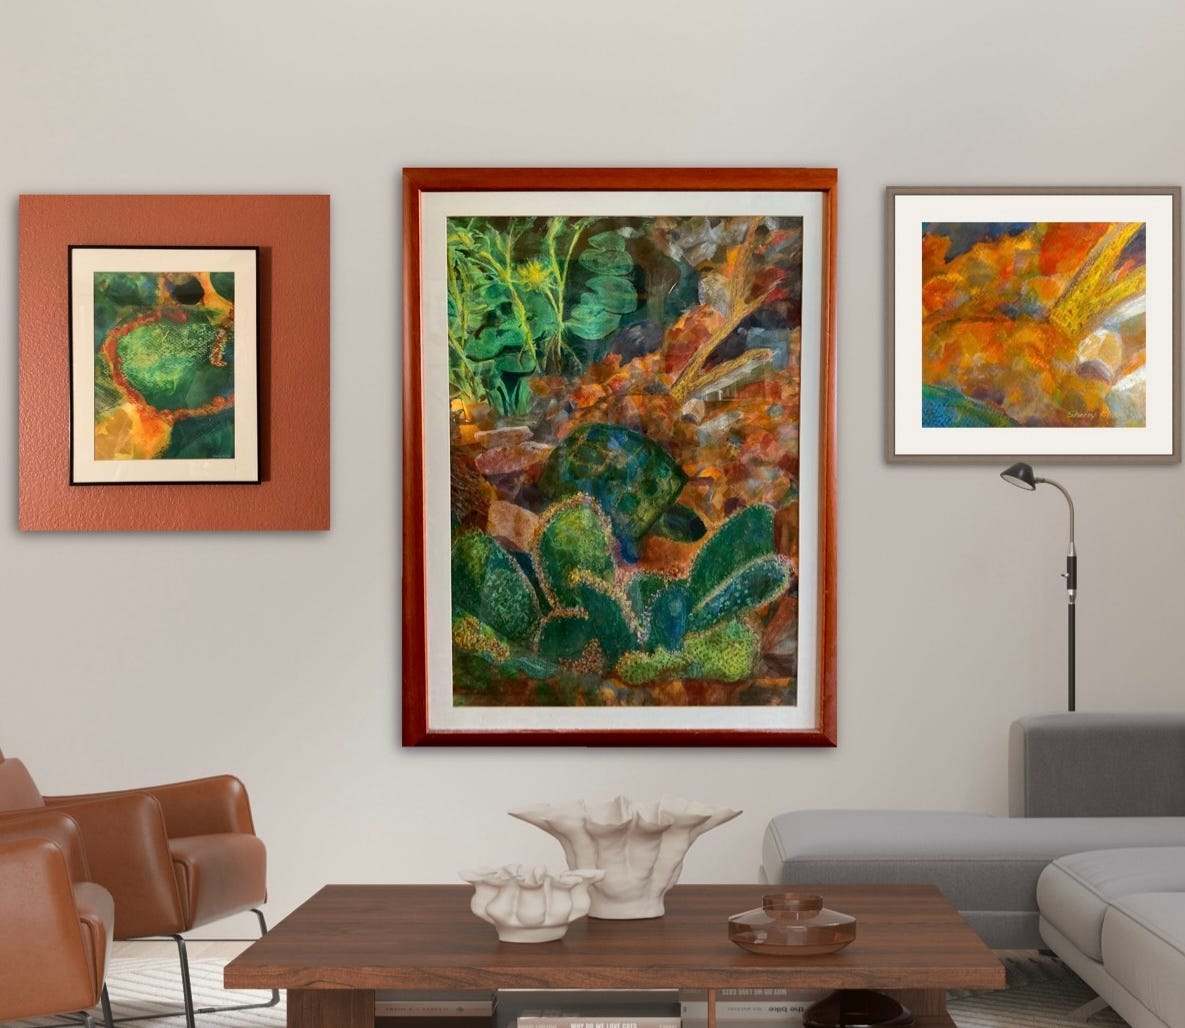 Three related artworks by Sherry Killam Arts: a large earthy scene with a tortoise among cactus, lily pads, rocks, and twigs.